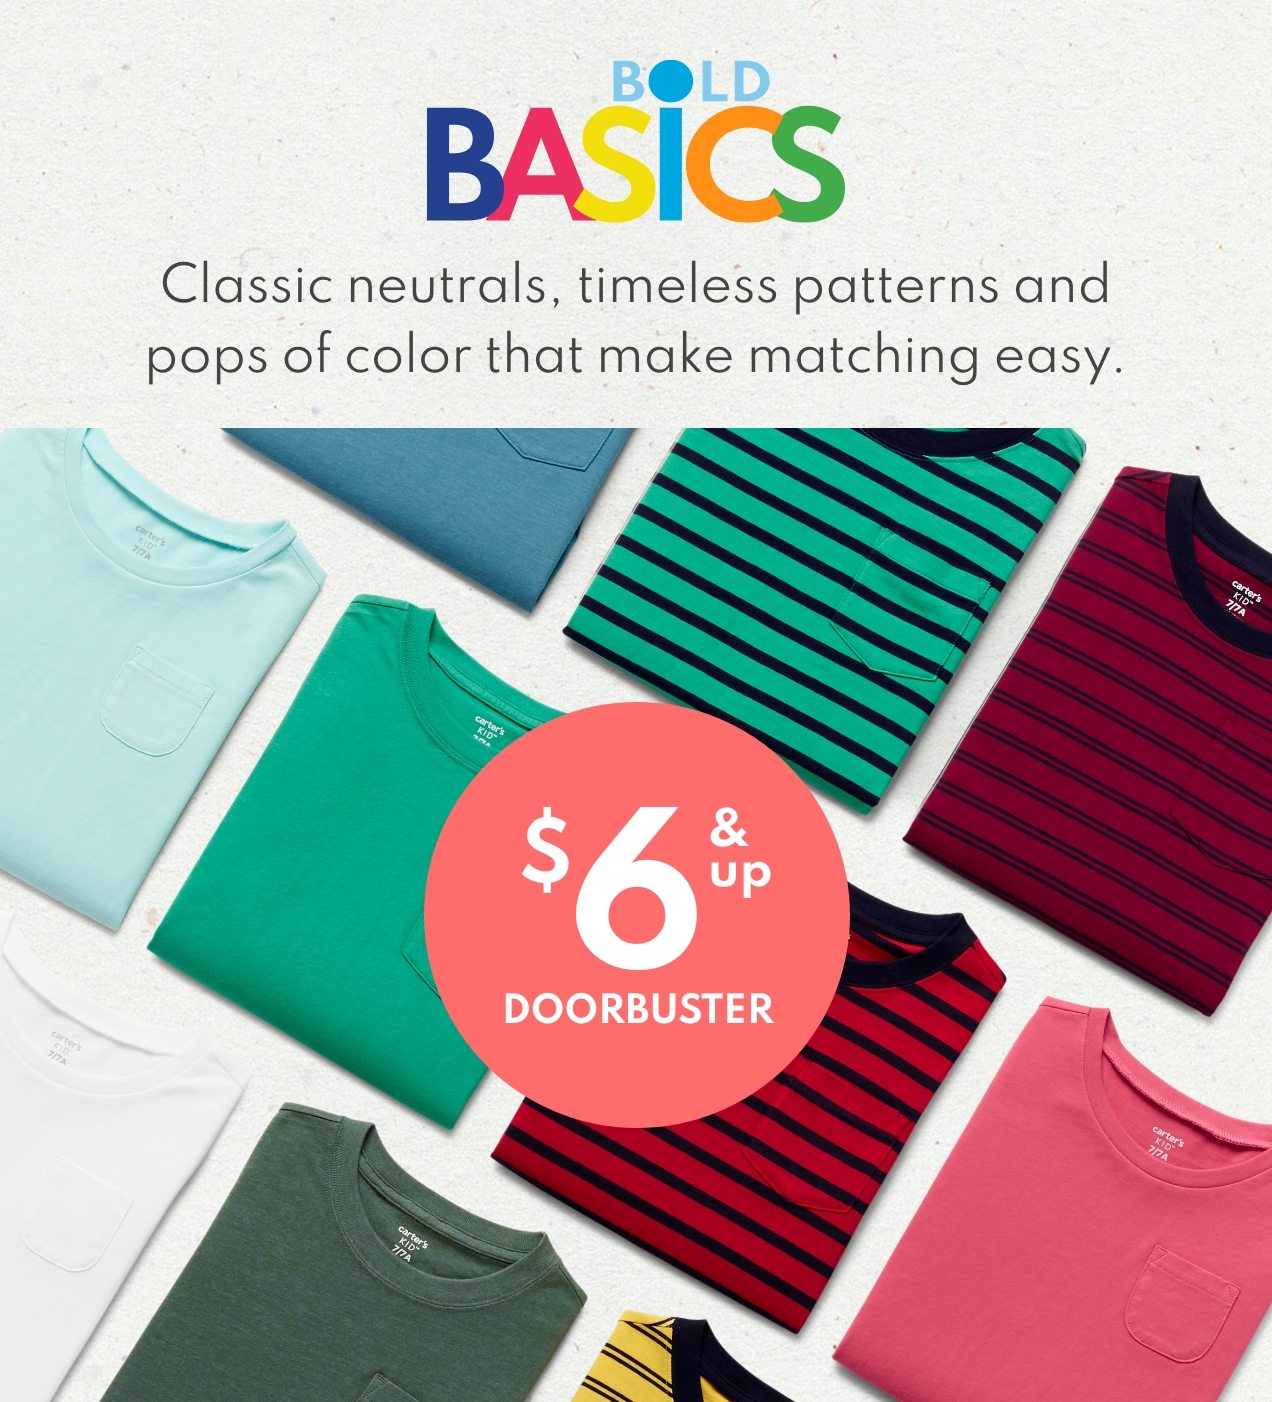 BOLD BASICS | Classic neutrals, timeless patterns and | pops of color that make matching easy. | $6 & up | DOORBUSTER 